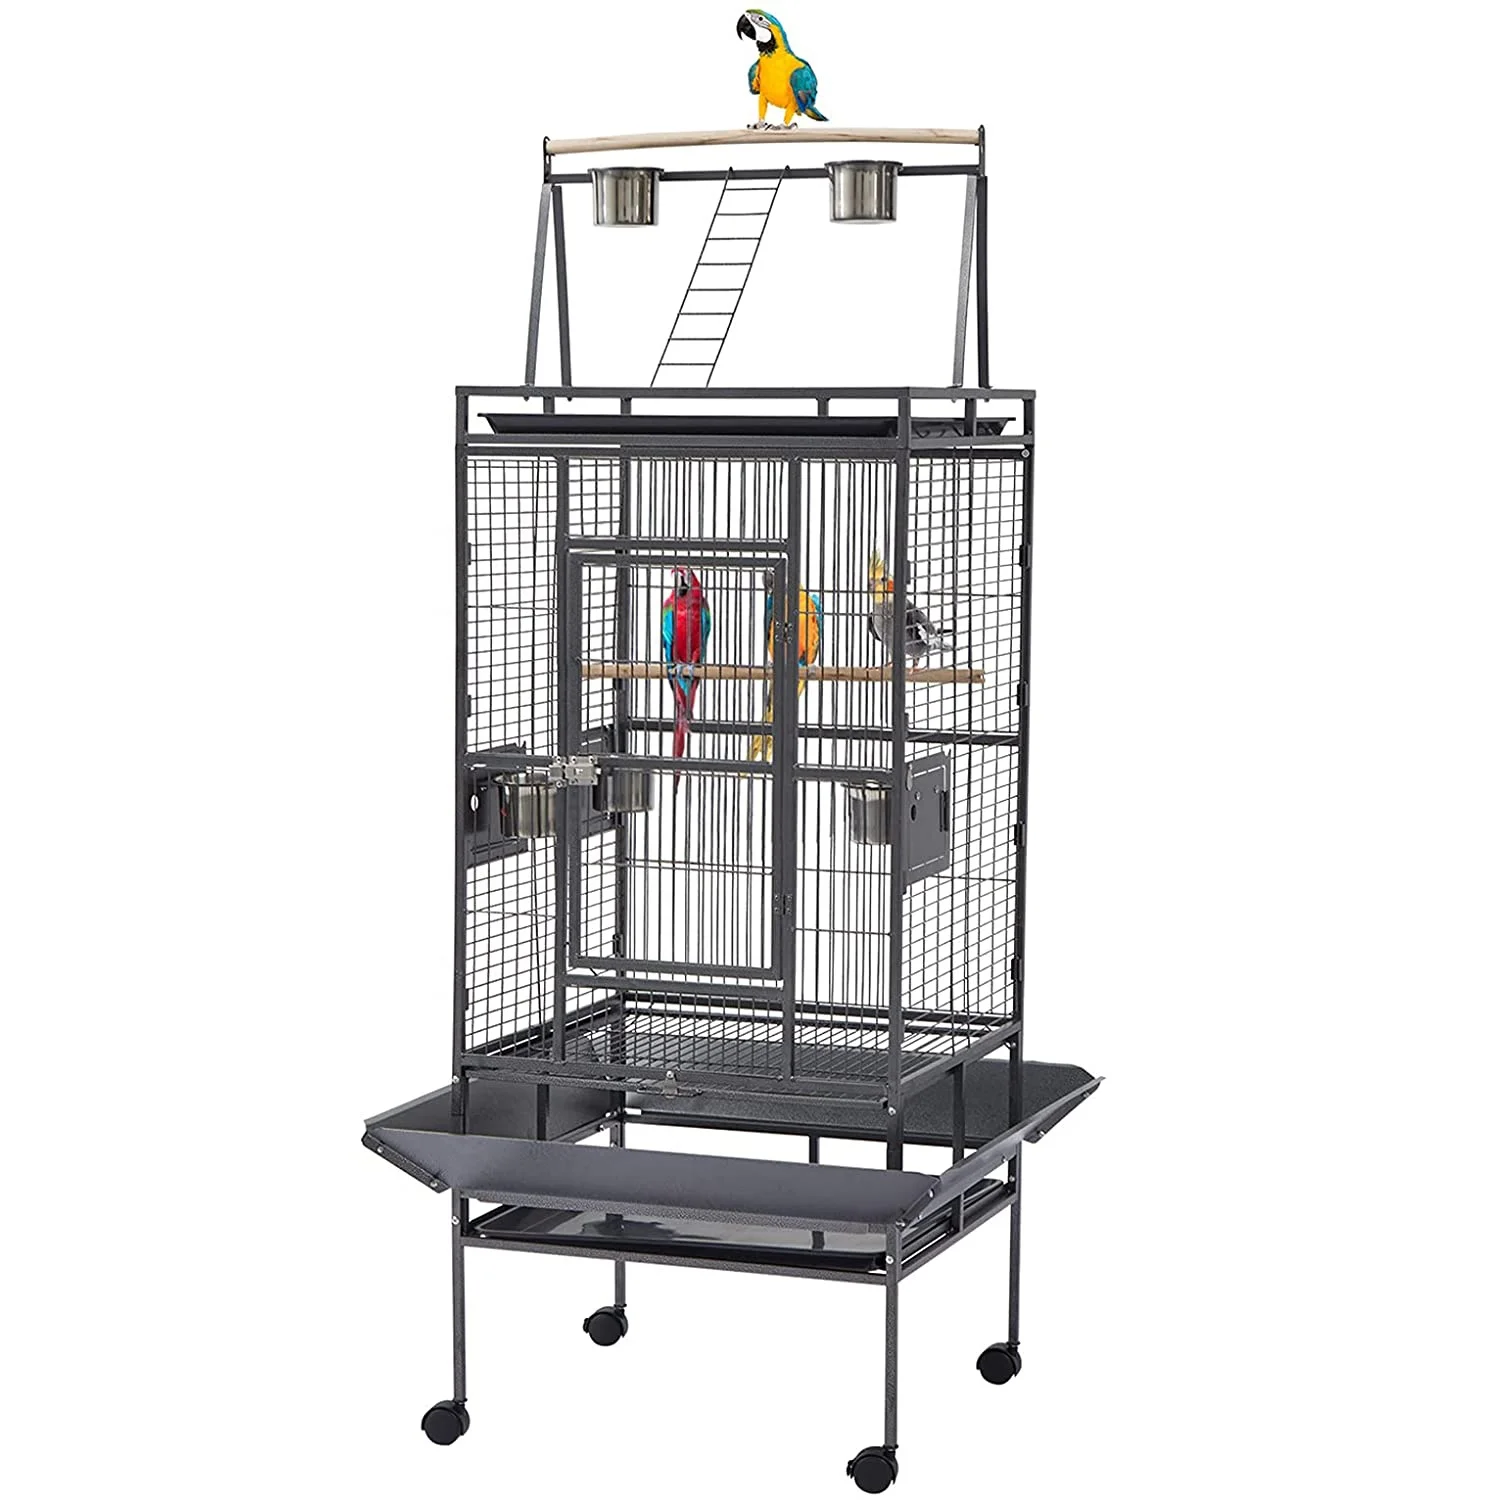 

Hot Sale Custom Big Bird Aviary Large Cage on Wheels Outdoor Iron House Bungee Birds Cage for Parrot Cockatiel Finch, White, pink, blue